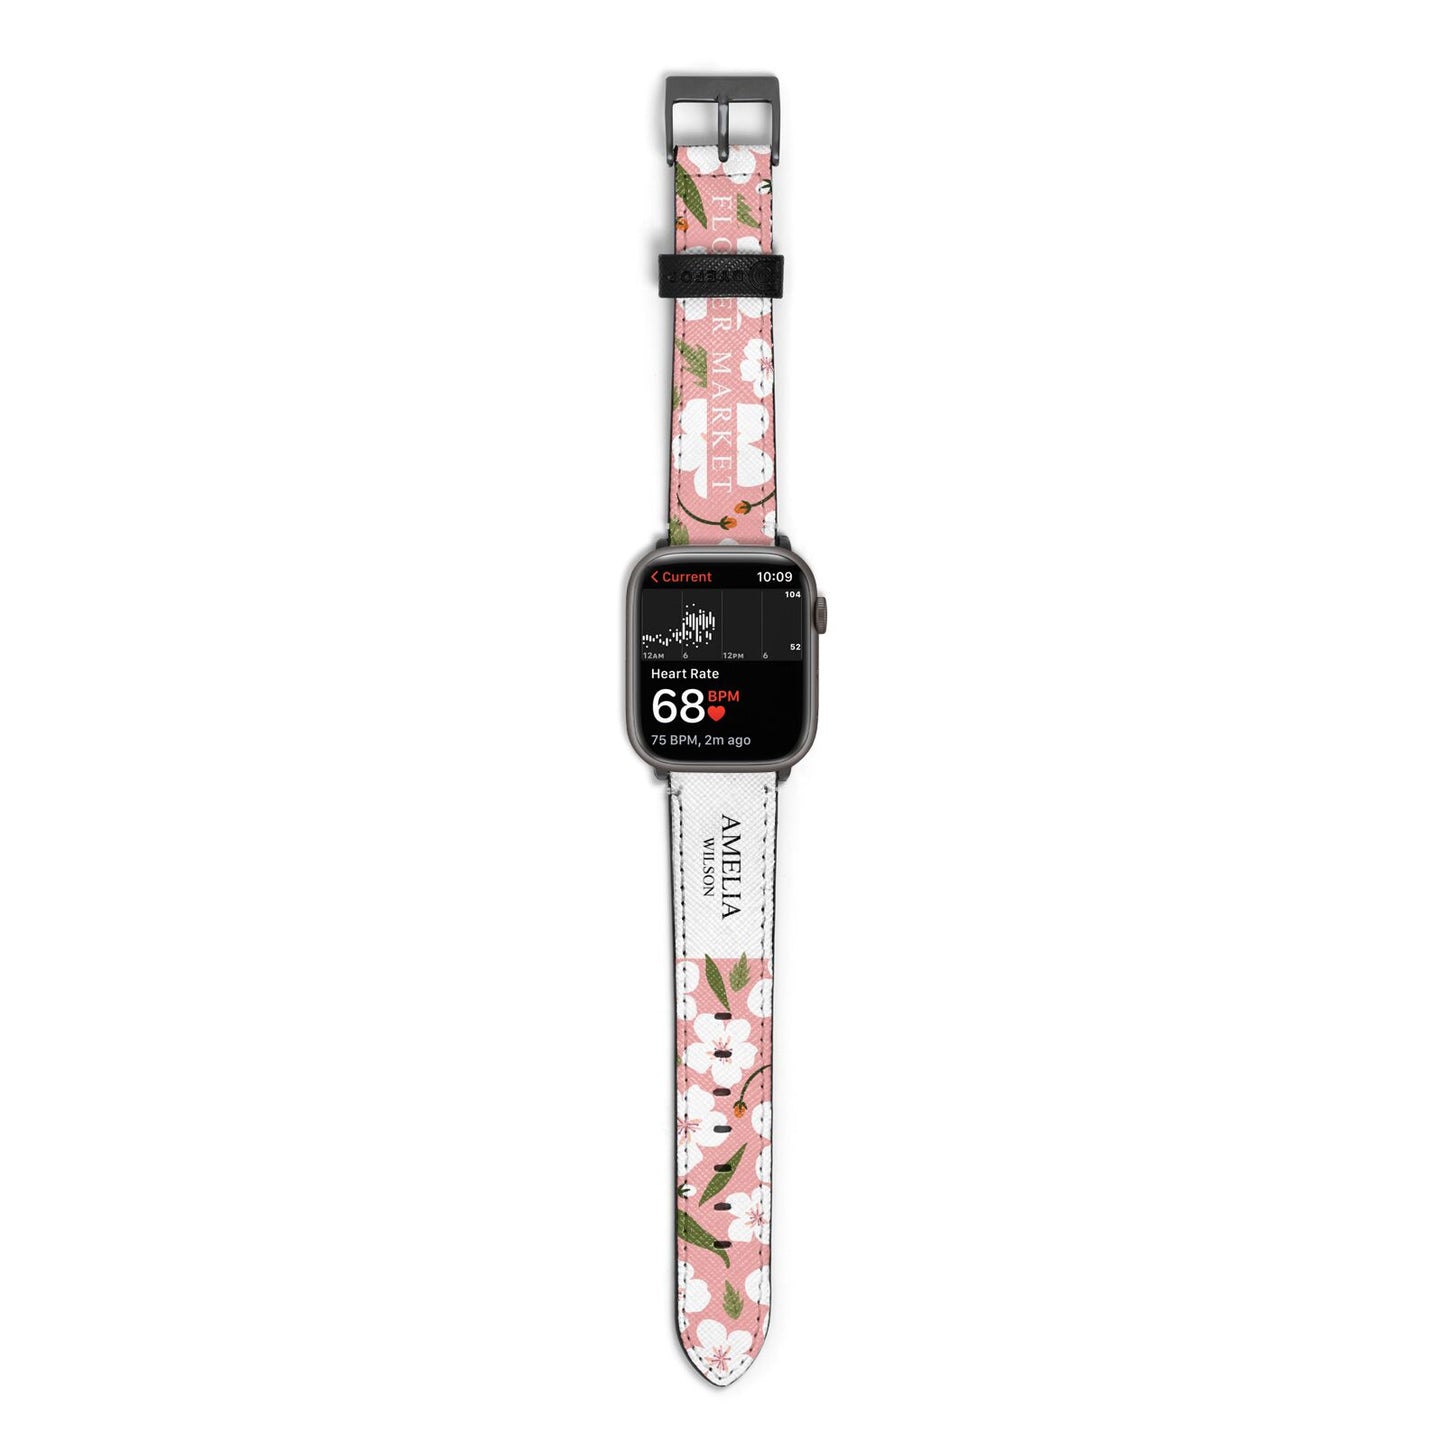 Stockholm Flower Market Poster Apple Watch Strap Size 38mm with Space Grey Hardware